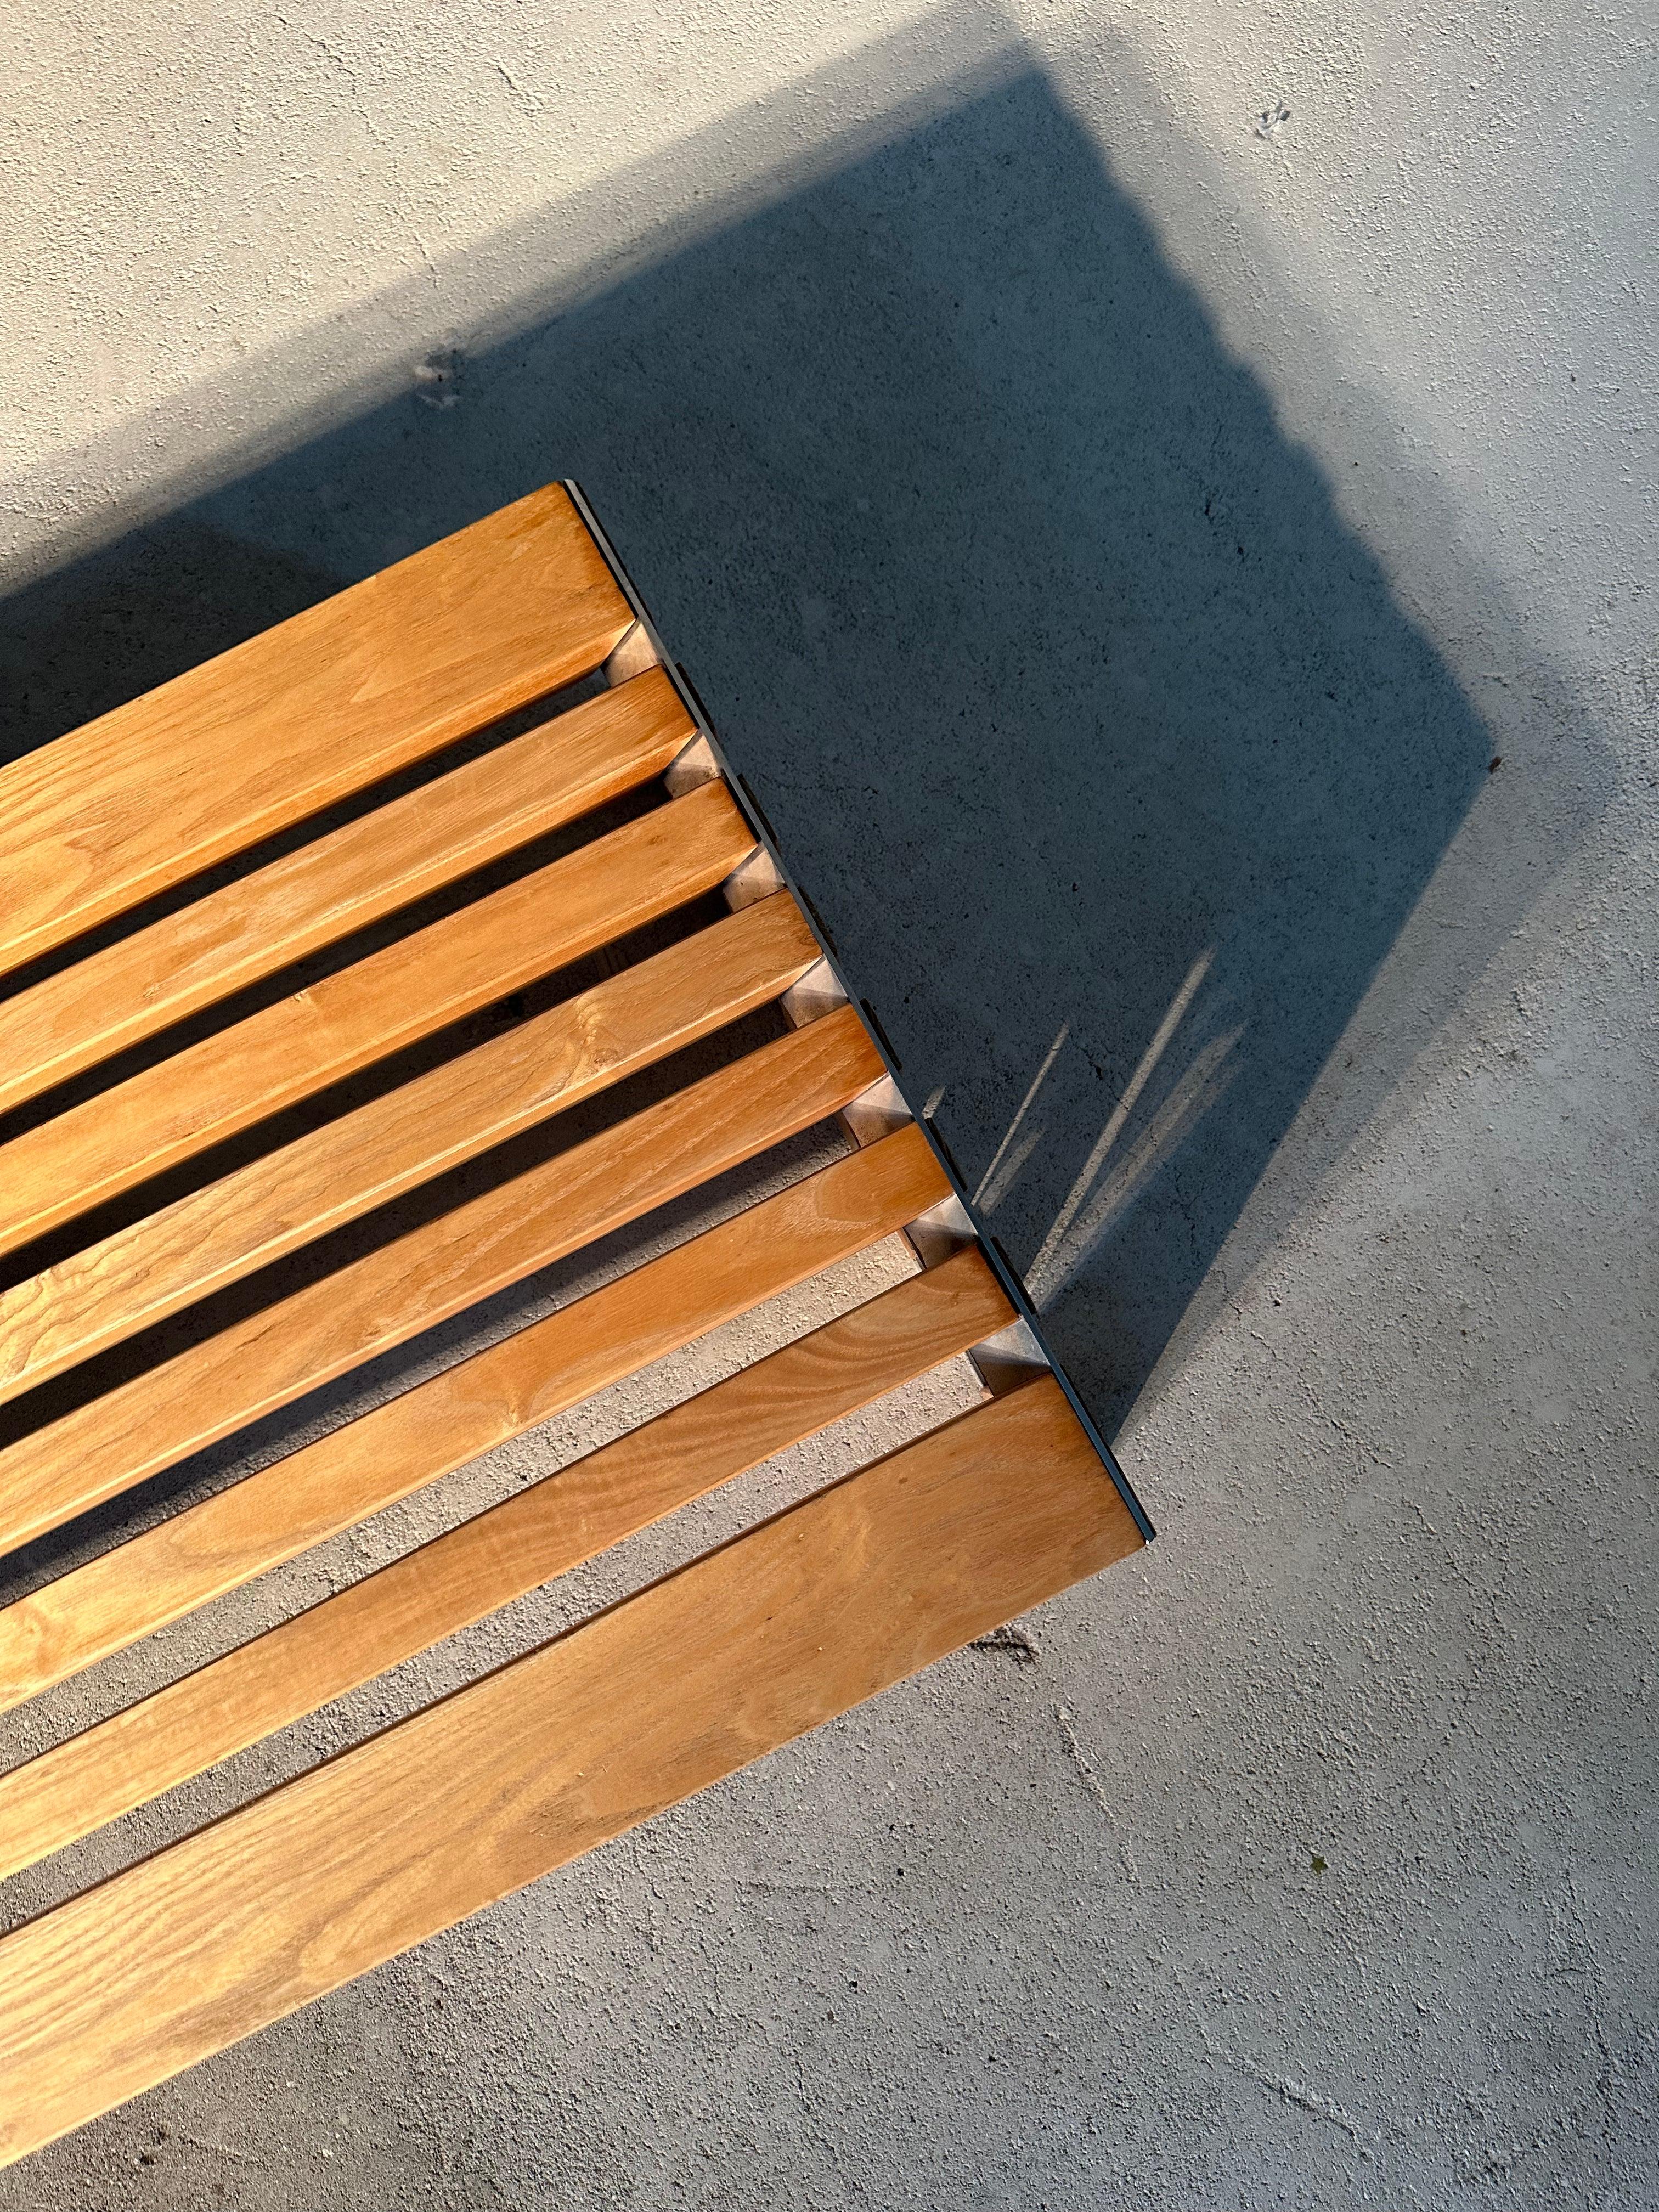 Slat bench from the ‘Passe-Par-Tout’ series designed by Walter Antonis for Spectrum, 1970s. Well constructed Dutch Design, super heavy quality. Can be used both as bench or coffee table. Remains in good condition with nice patination.